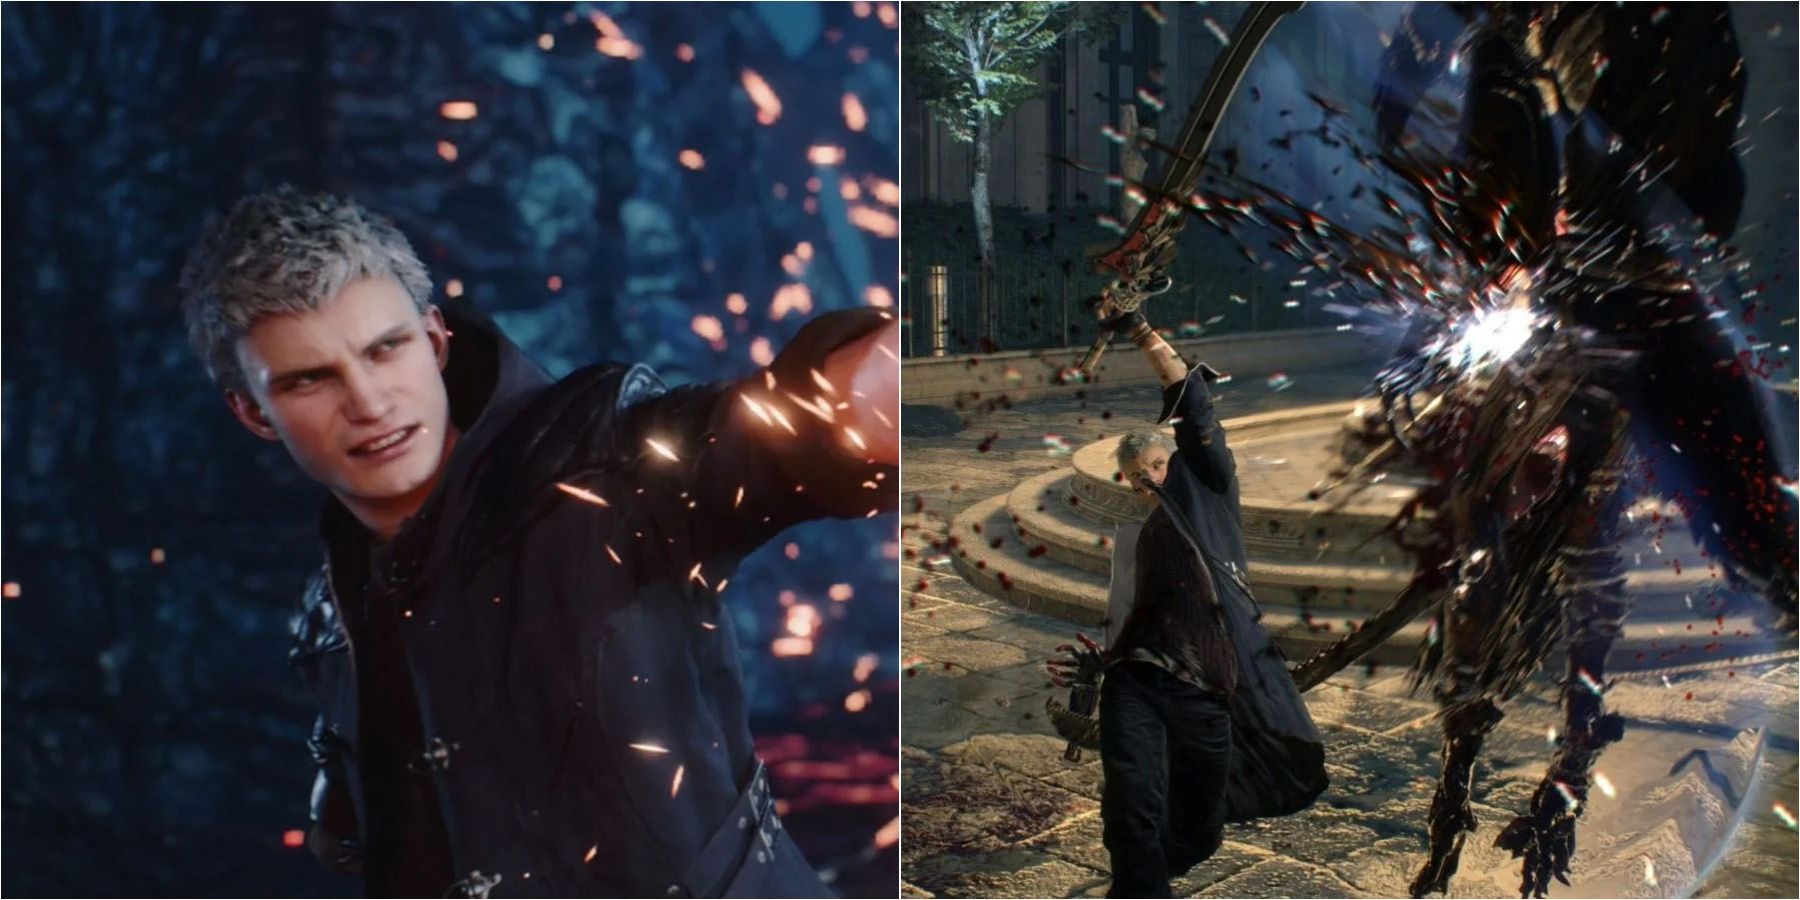 Devil May Cry 5: Dante's Best Abilities & Upgrades